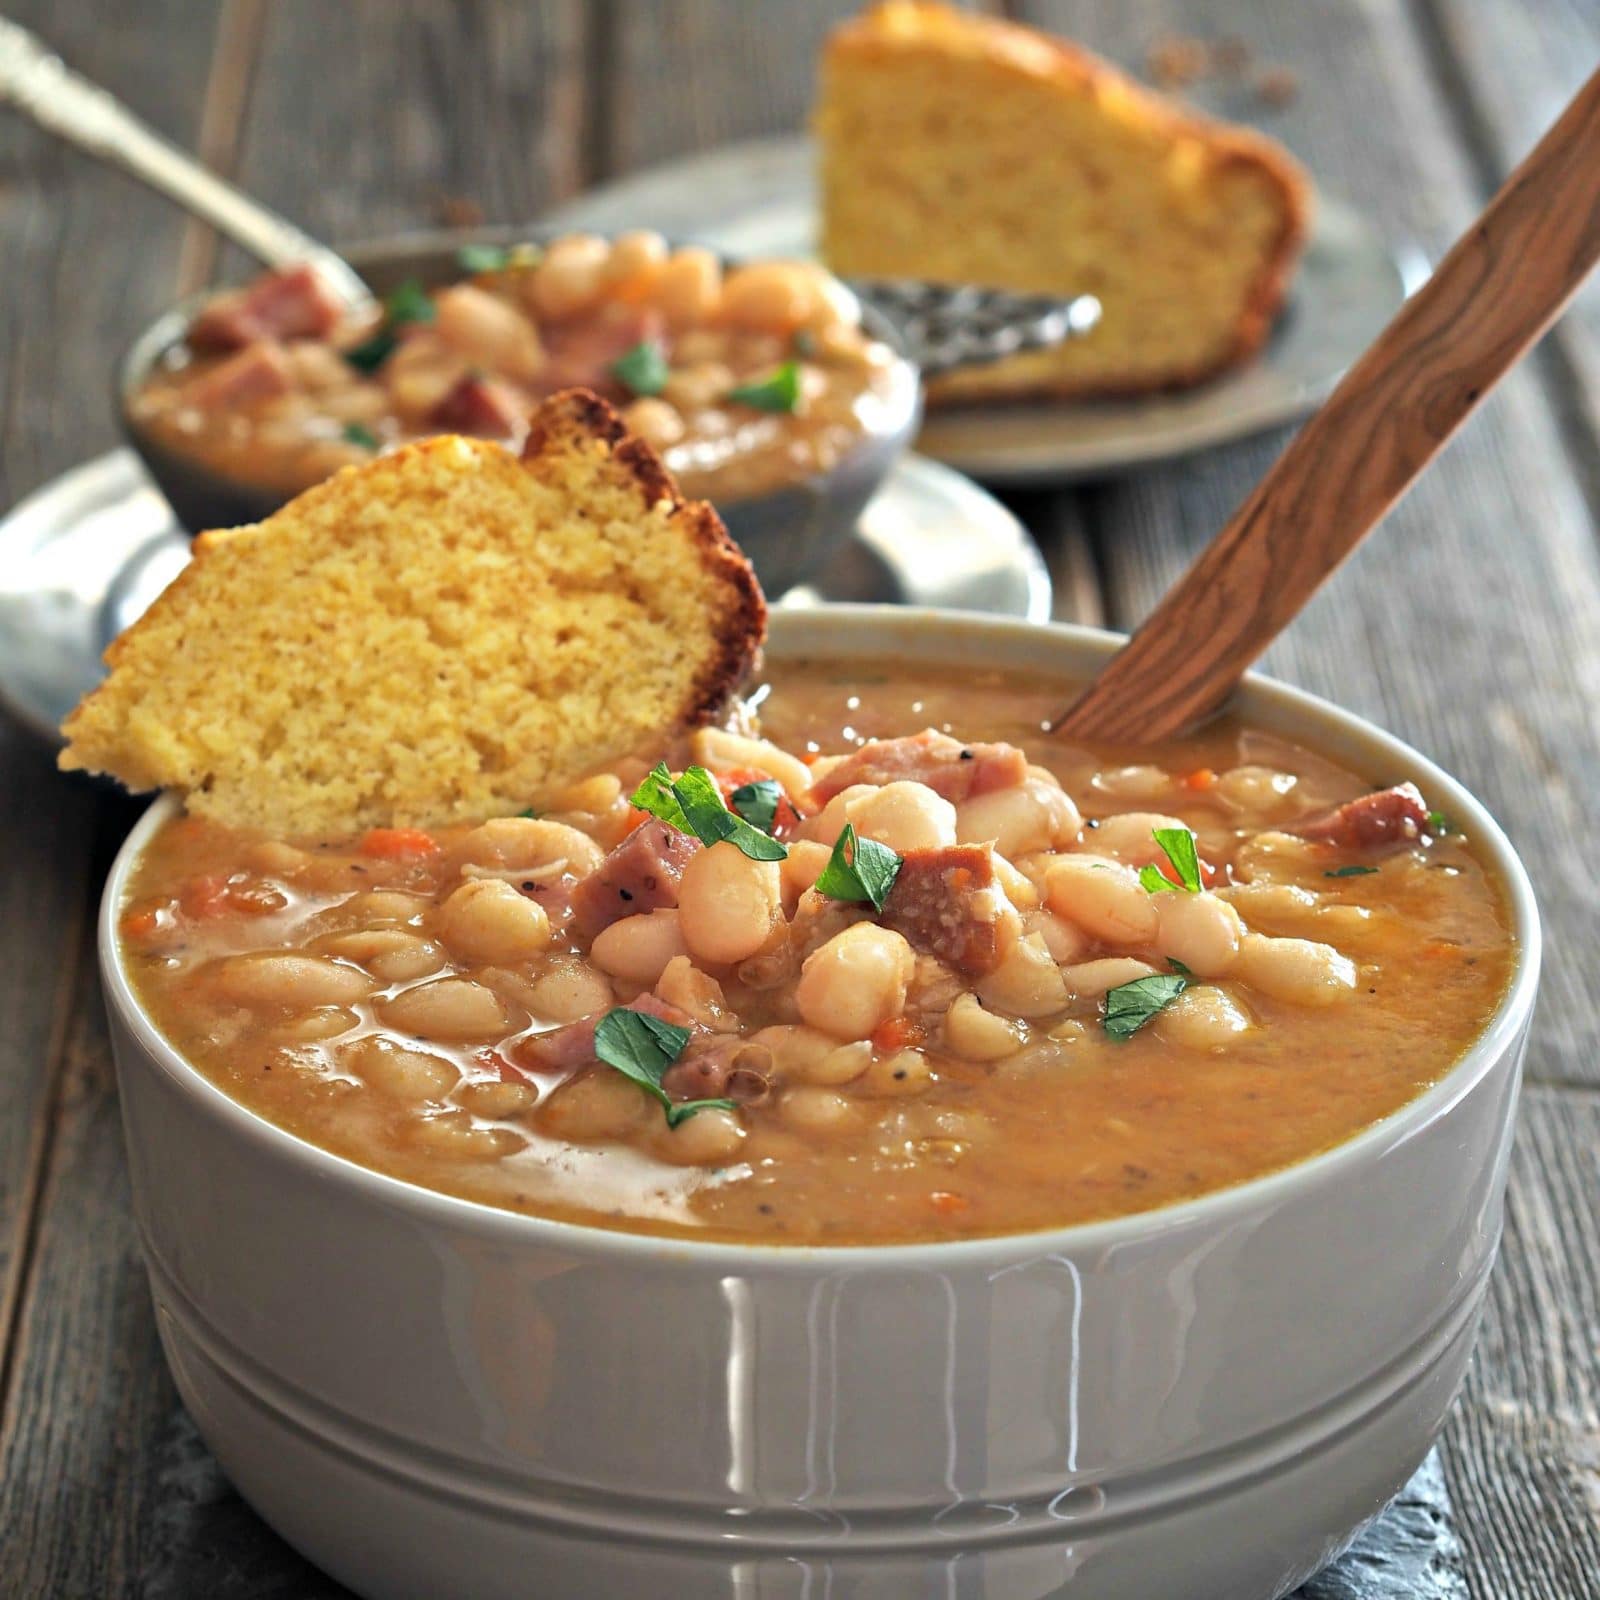 Classic Ham & Bean Soup. White beans & ham simmered w/onions, carrots, seasonings and a few secret ingredients until magic happens. Soups on folks! Simply Sated